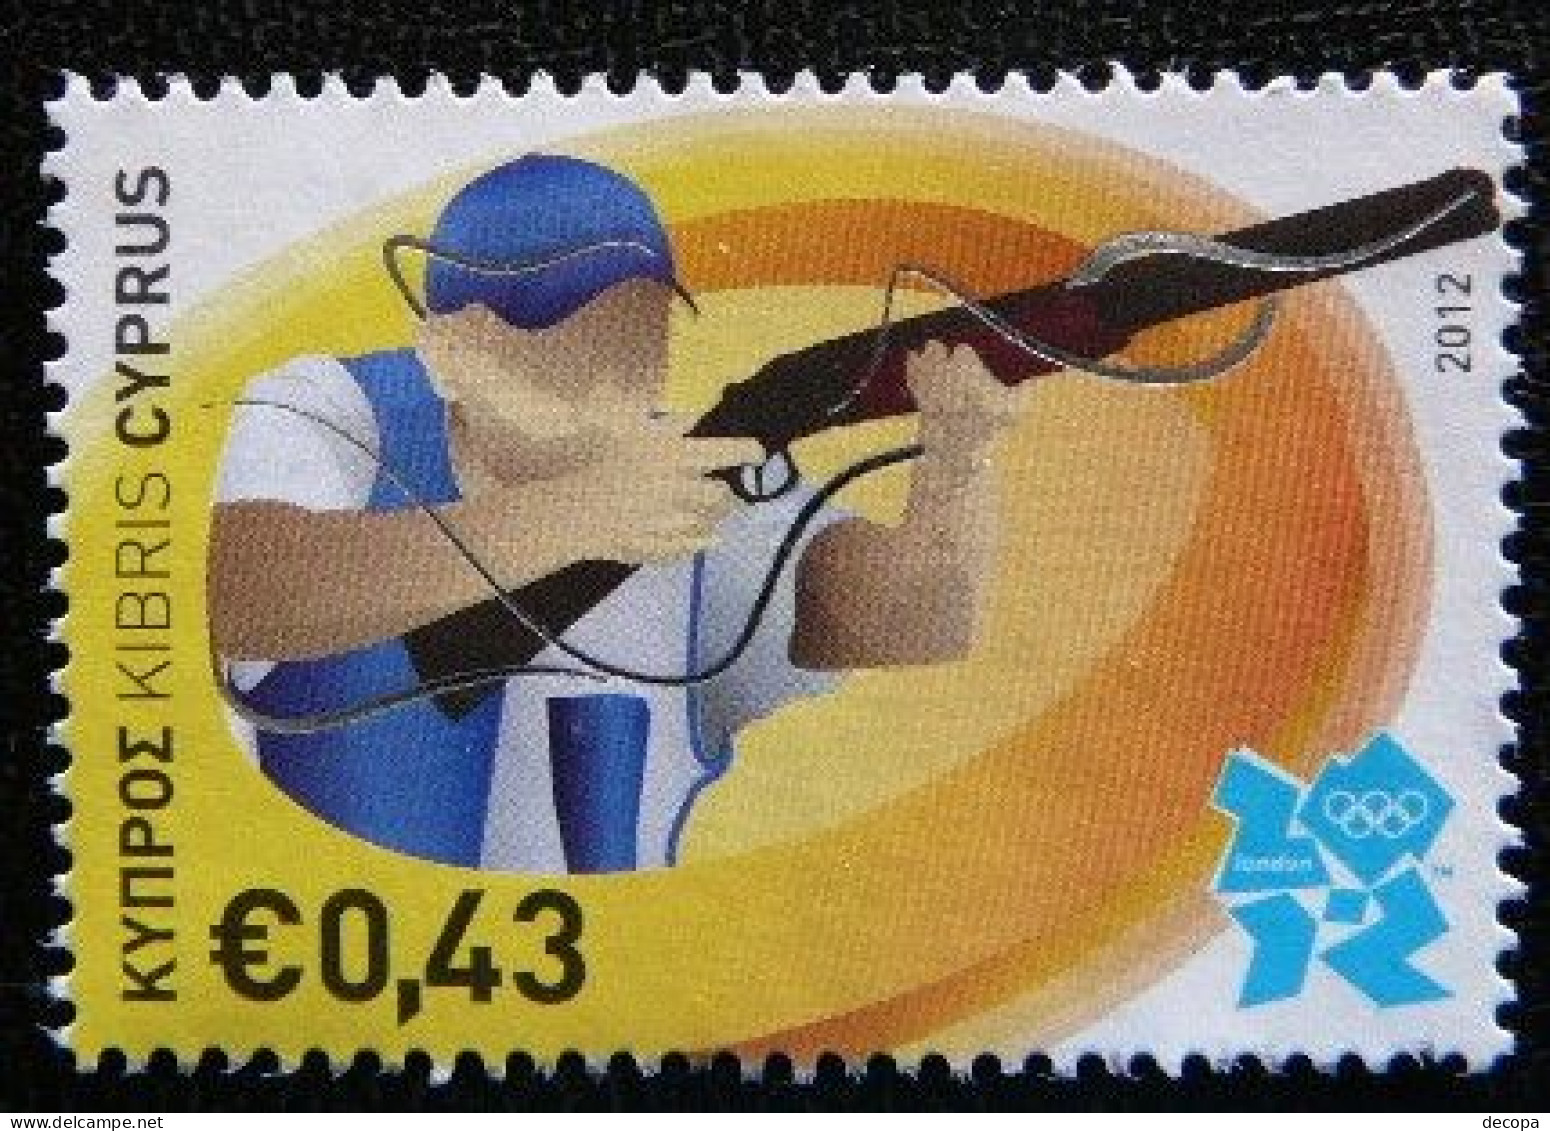 (dcos-466)   Cyprus - Chypre - 2012   Michel  BF 43    MH - Unused Stamps